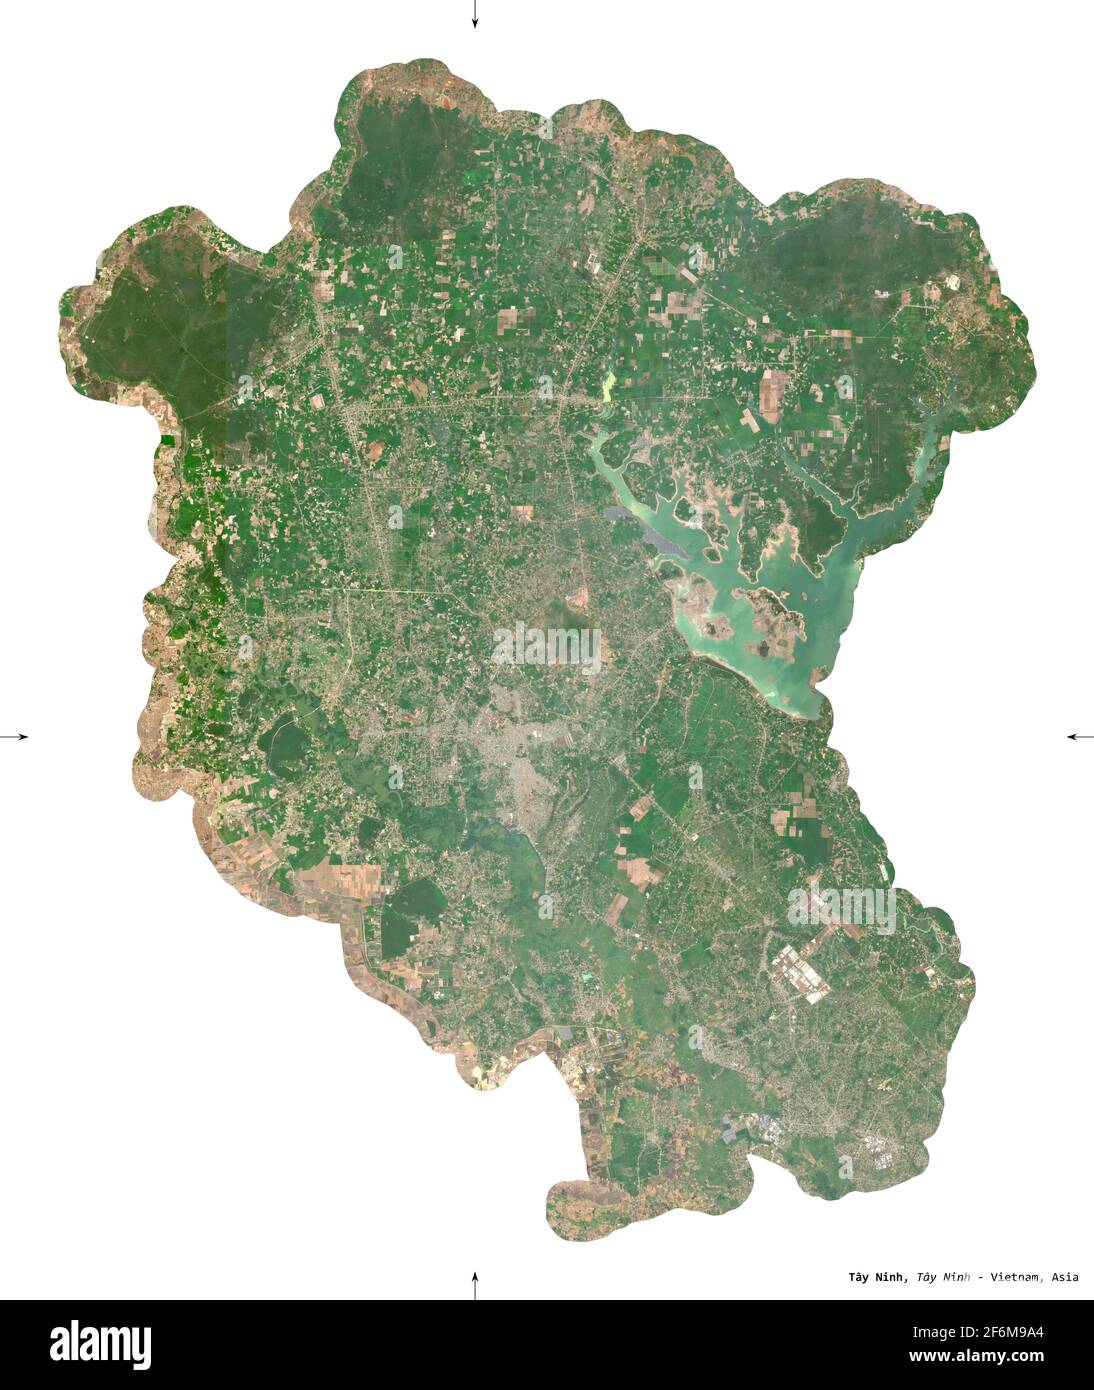 Tay Ninh, province of Vietnam. Sentinel-2 satellite imagery. Shape isolated on white. Description, location of the capital. Contains modified Copernic Stock Photo